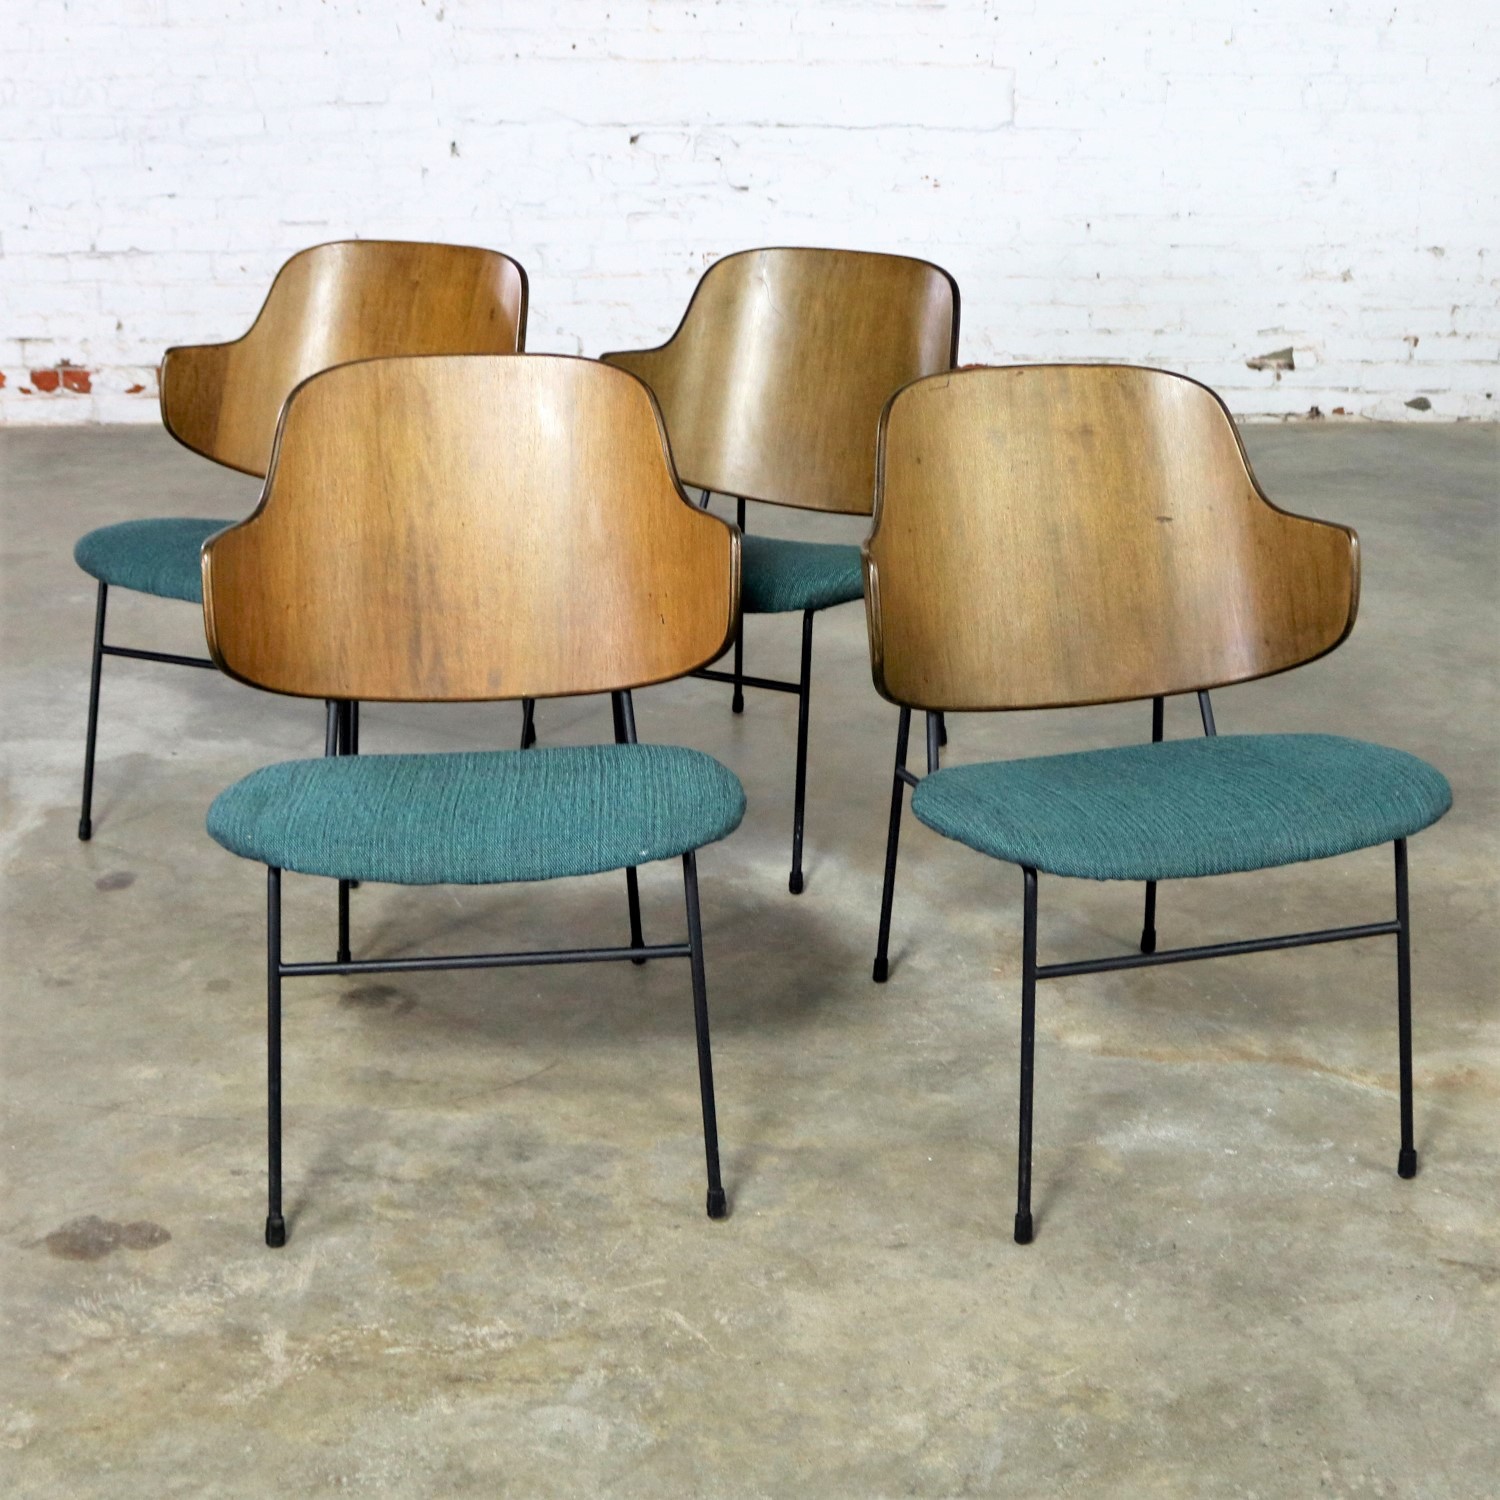 Set of Four Ib Kofod-Larsen Penguin Chairs with Walnut Molded Backs and Turquoise Seats